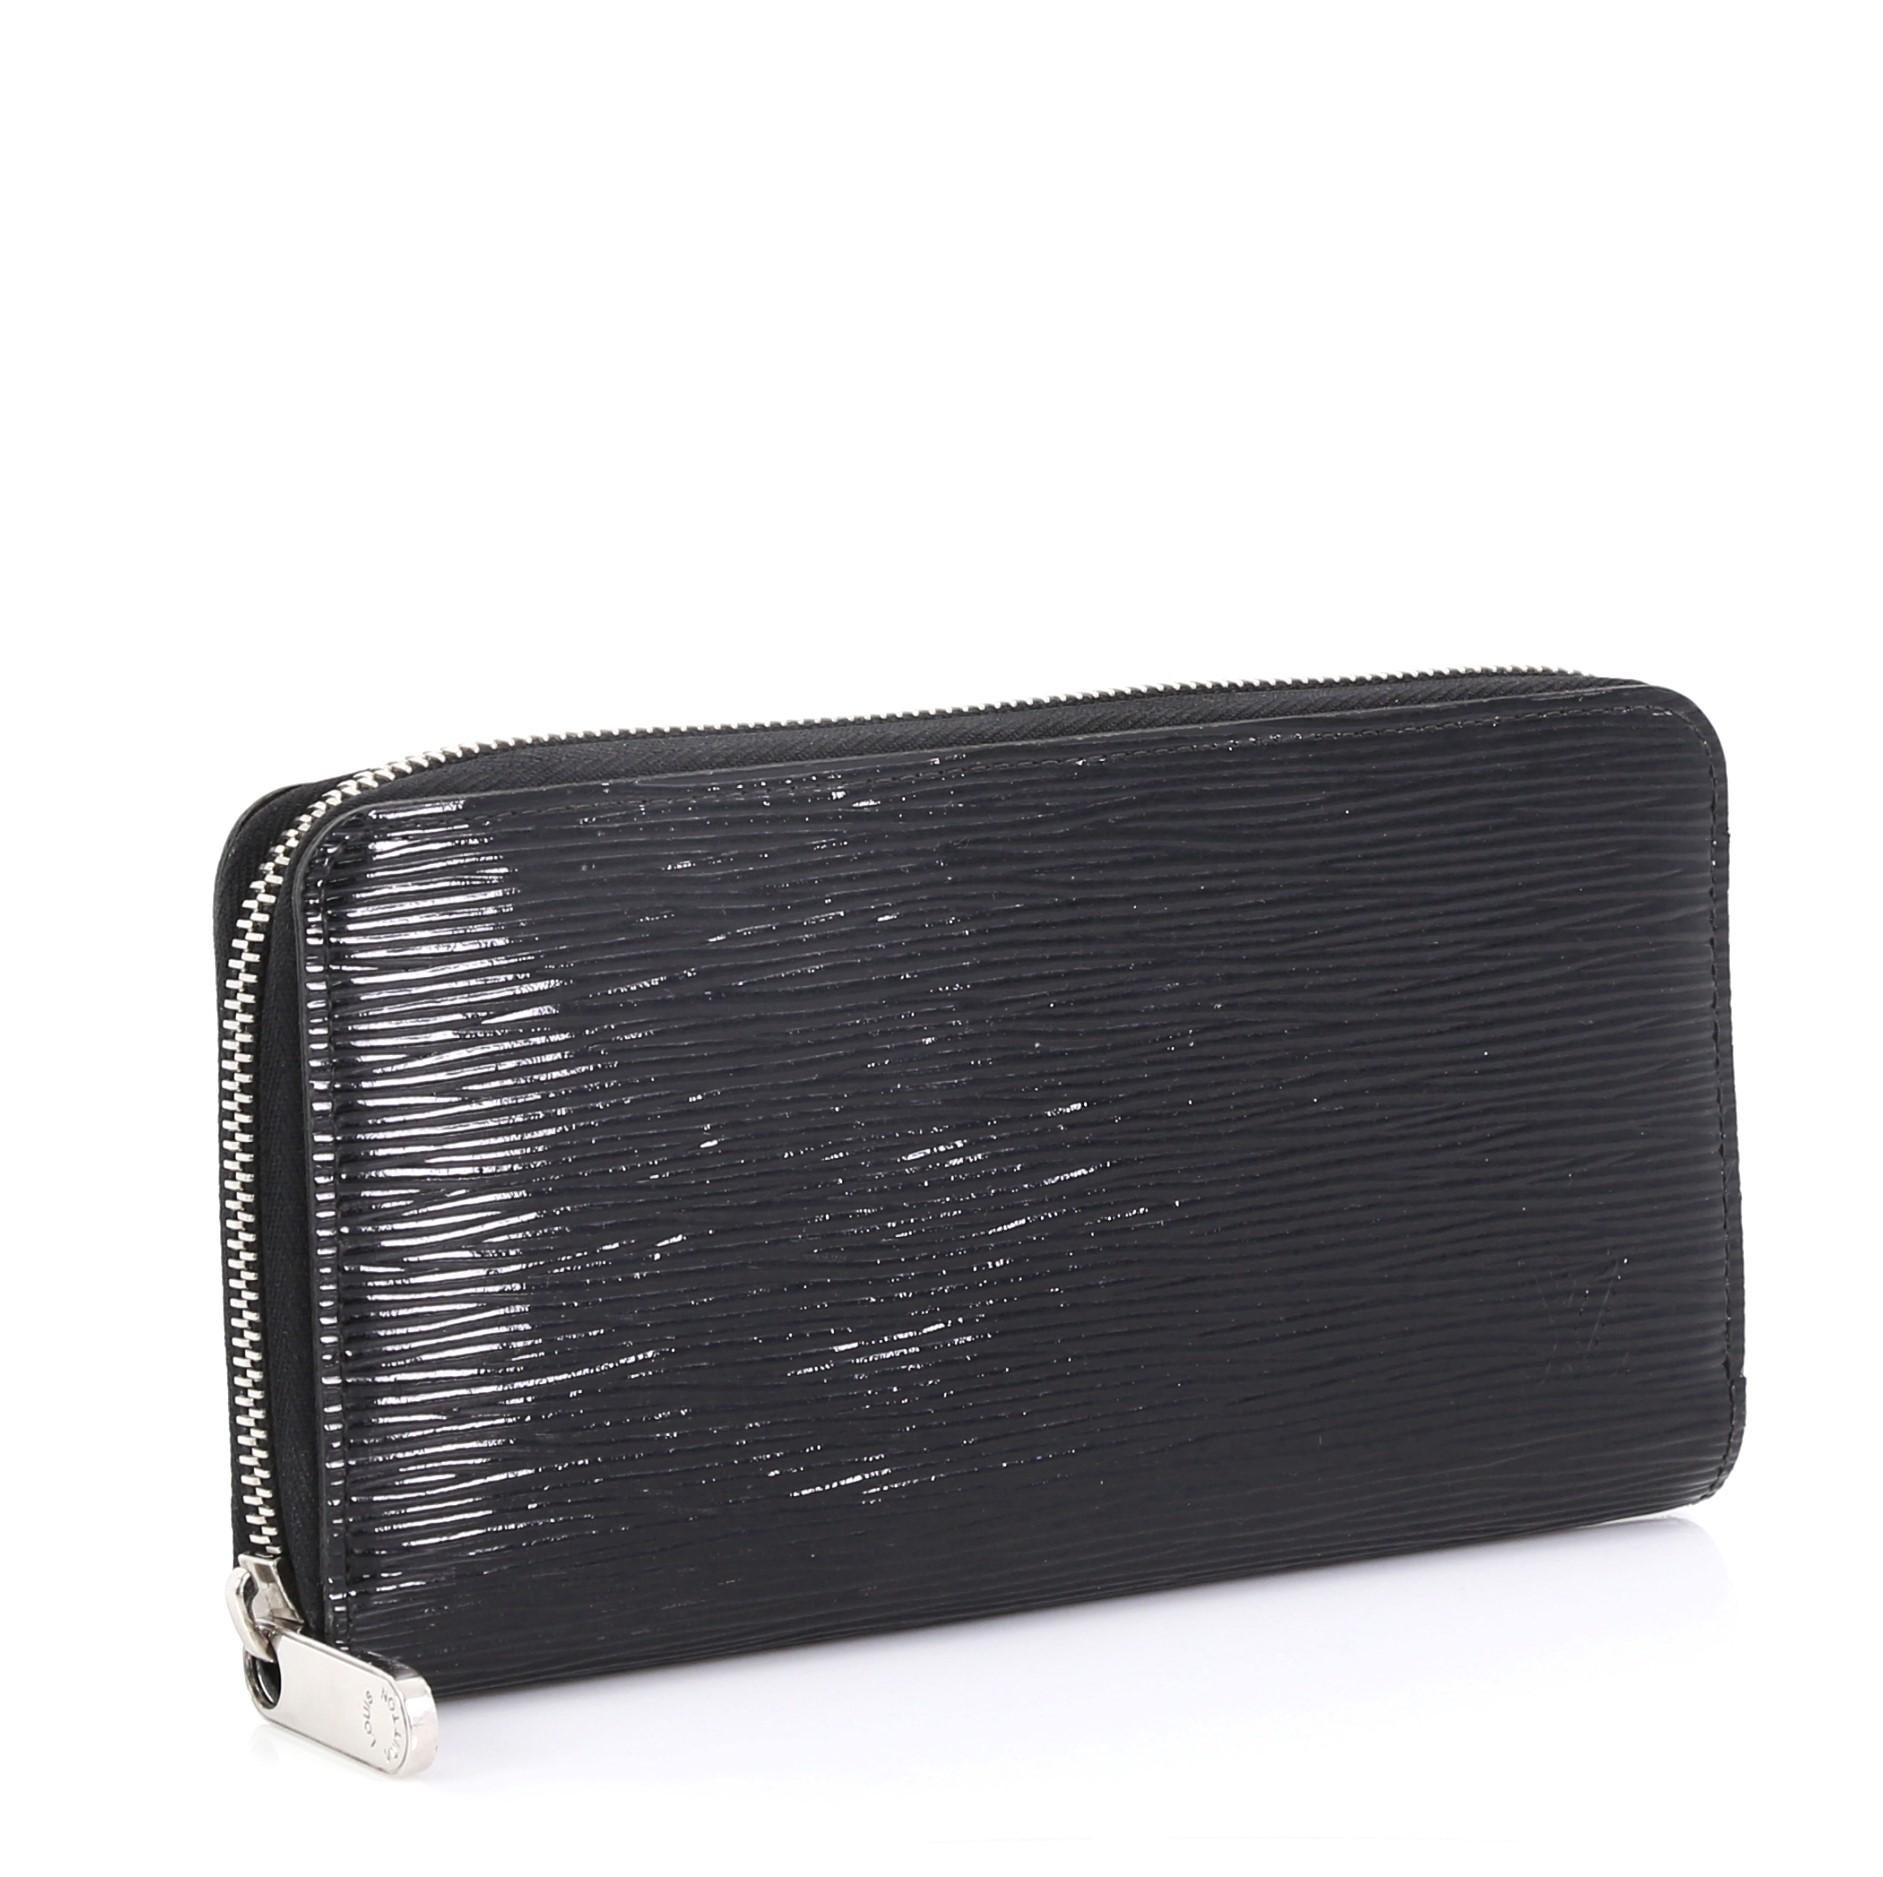 This Louis Vuitton Zippy Wallet Electric Epi Leather, crafted from black electric epi leather, features subtle stamped LV logo and silver-tone hardware. Its zip around closure opens to a black leather interior with middle zip compartment, multiple